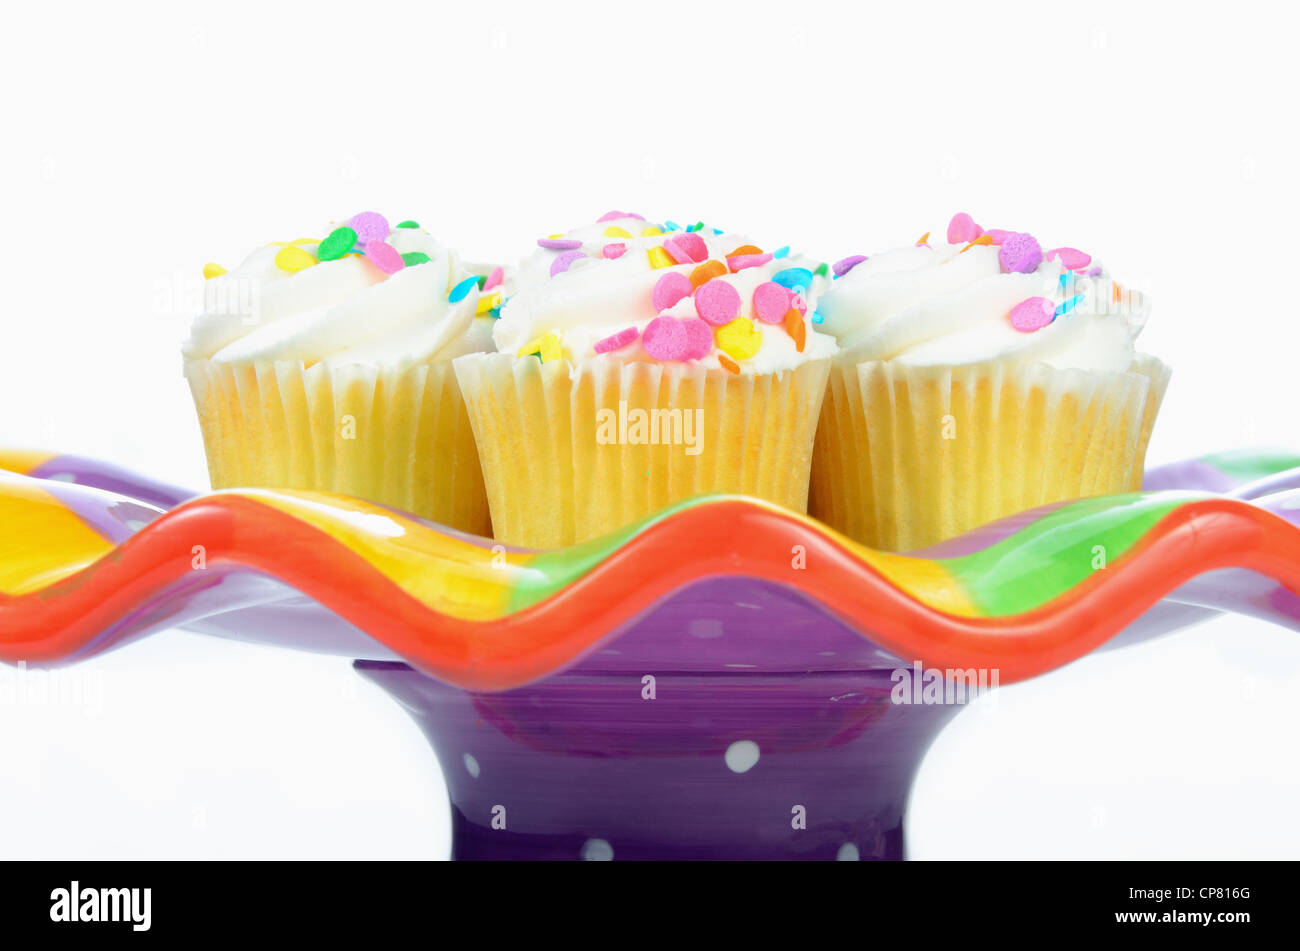 cupcakes on a colorful display plate isolated Stock Photo